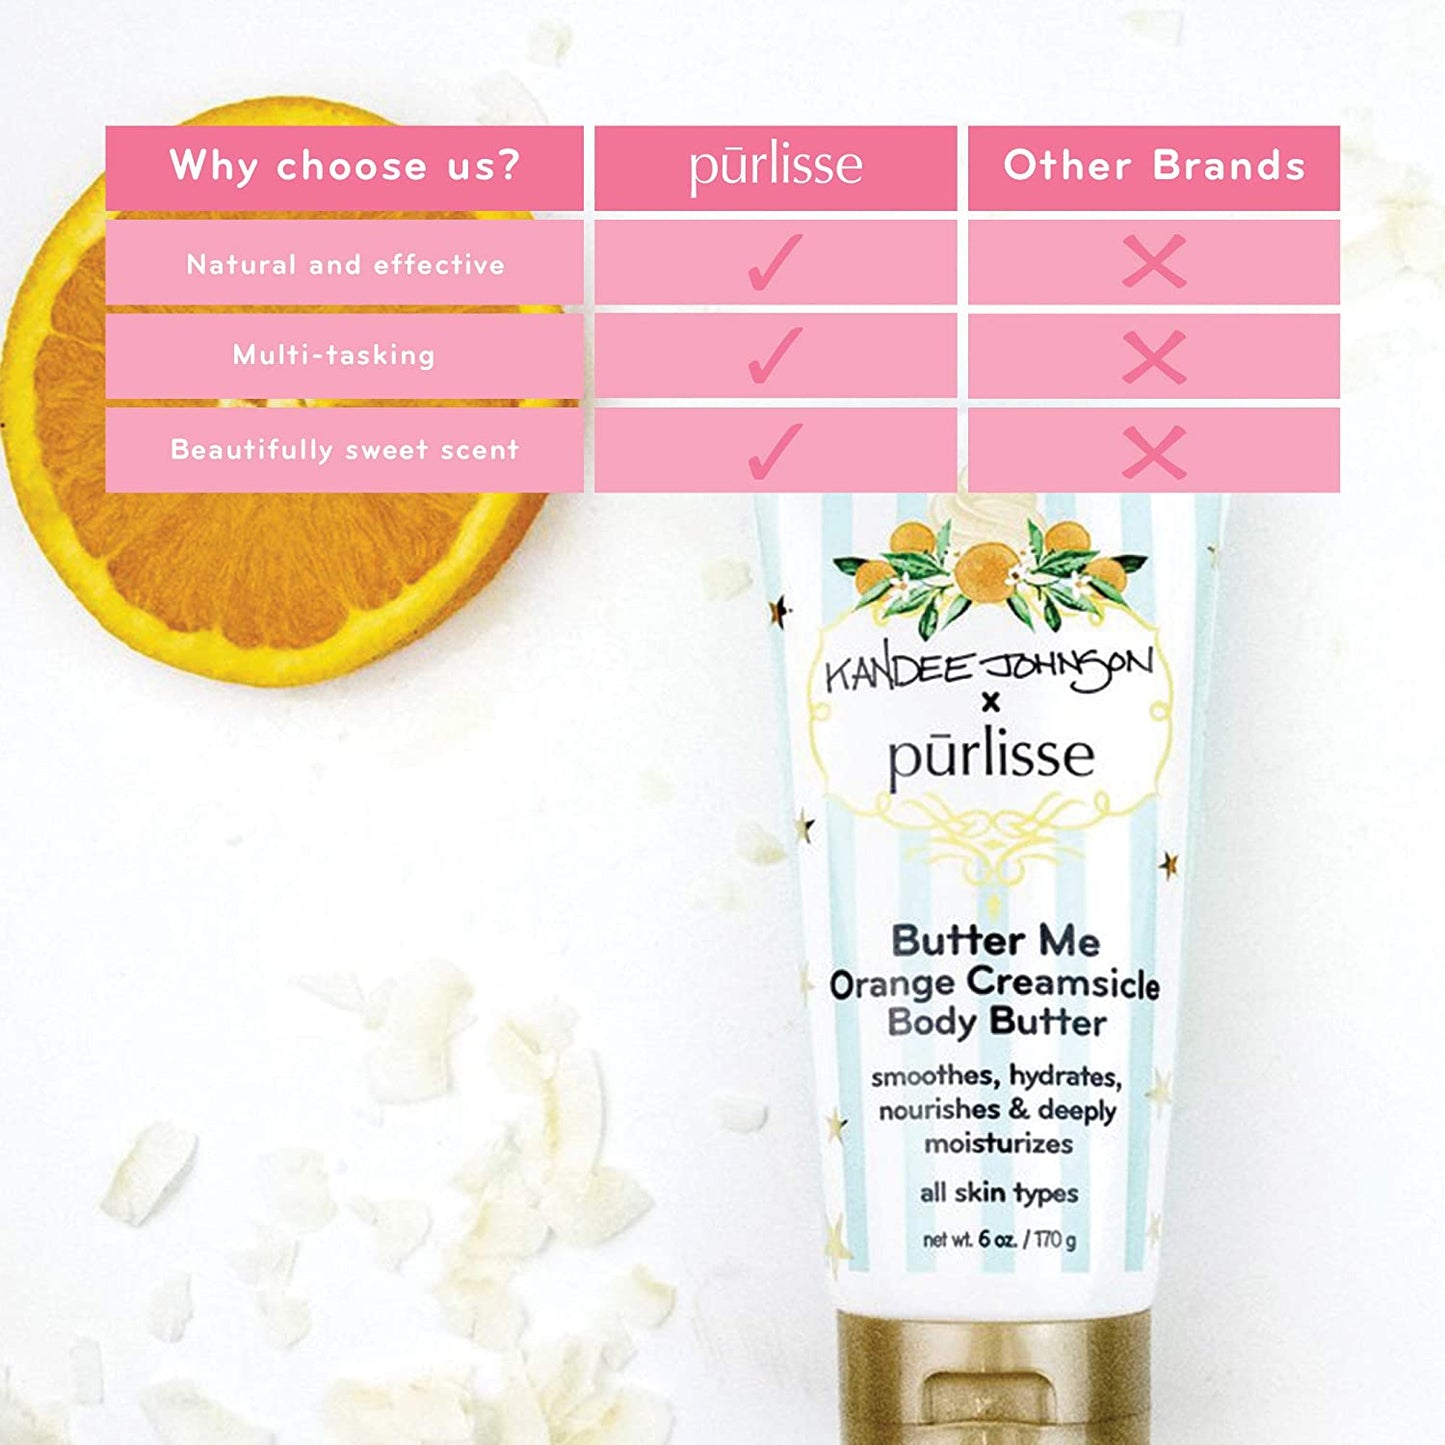 Kandee Johnson x Purlisse Butter Me Orange Creamsicle Body Butter 170g